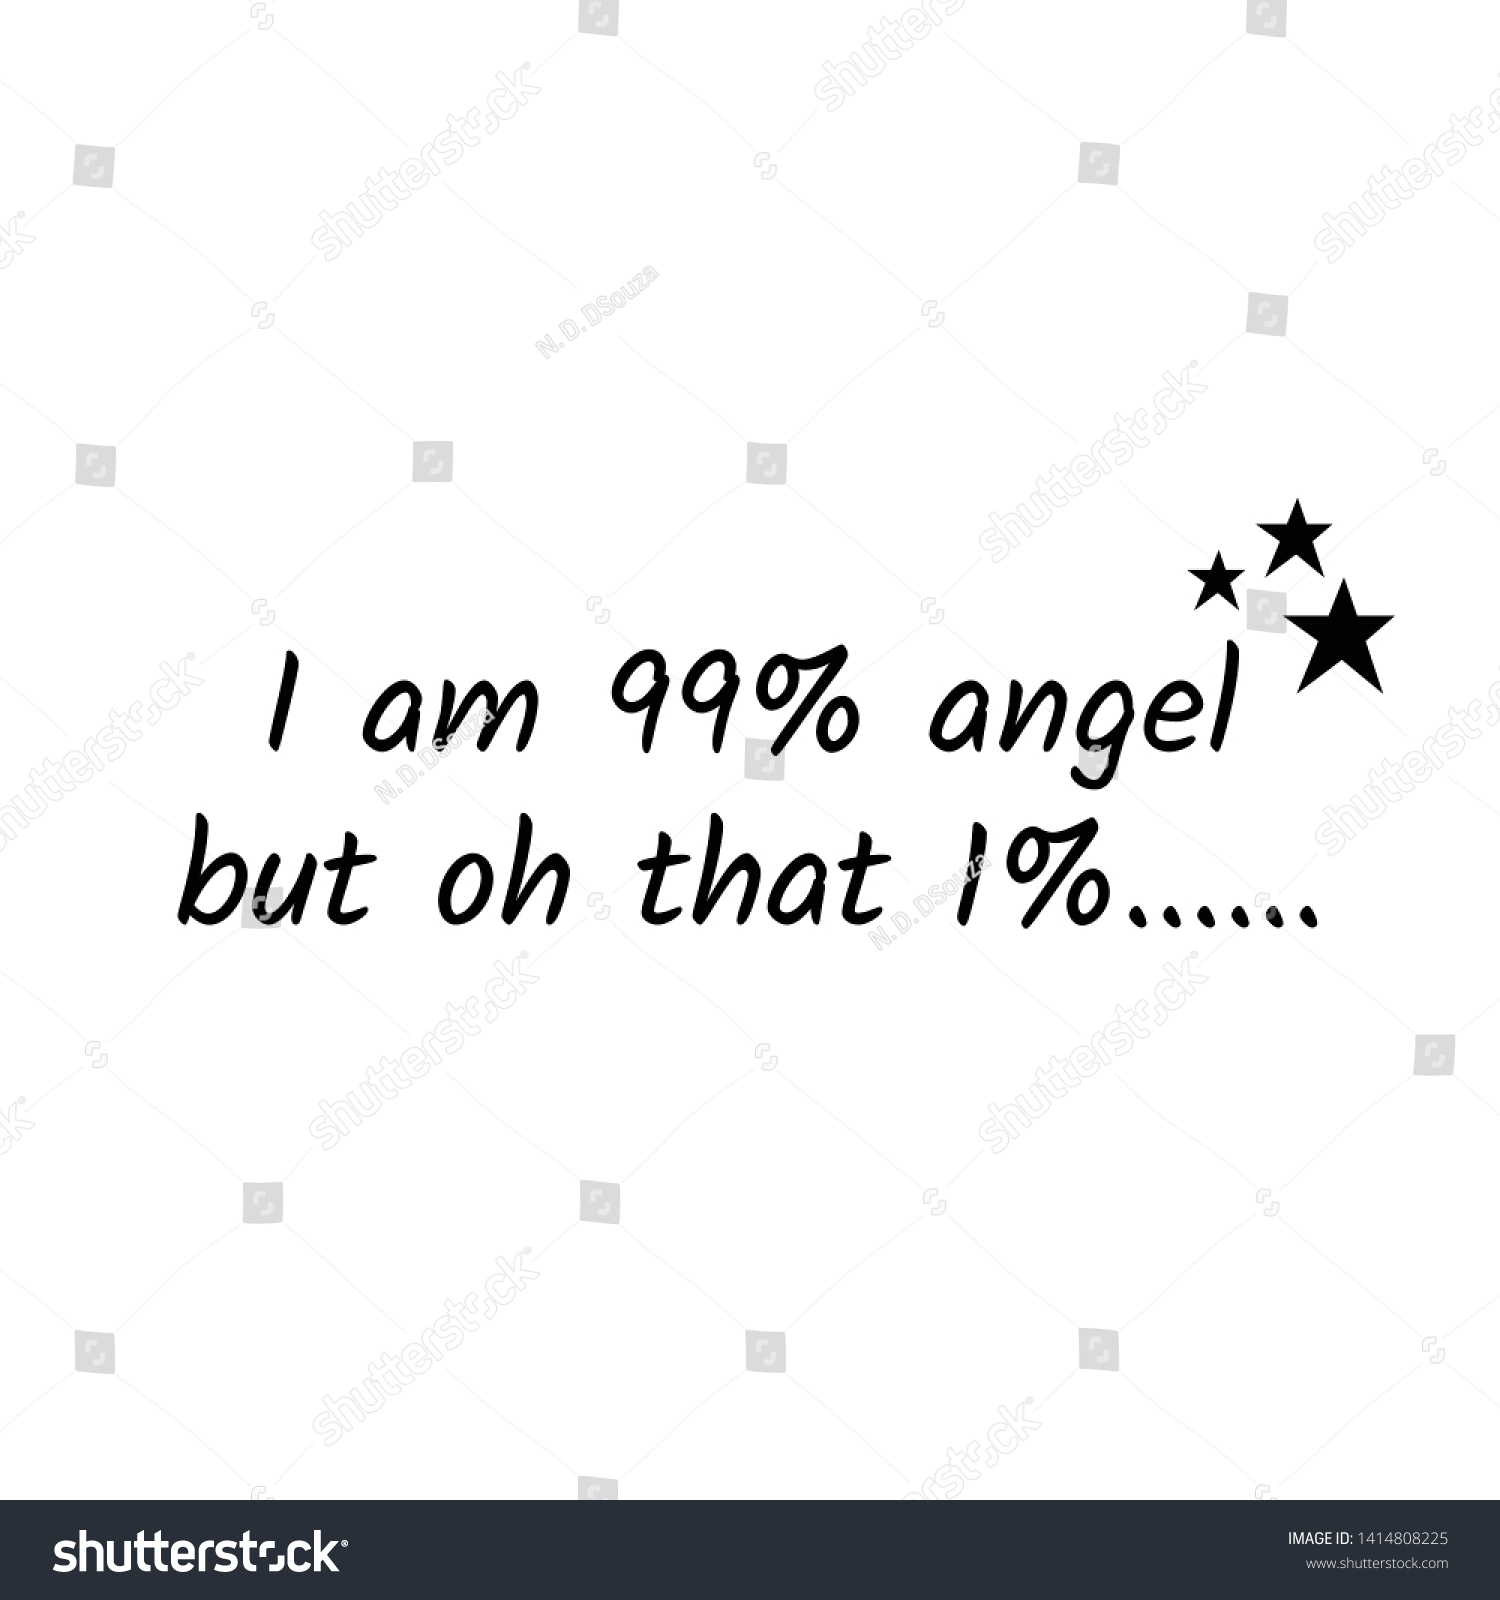 99 angel but oh that 1